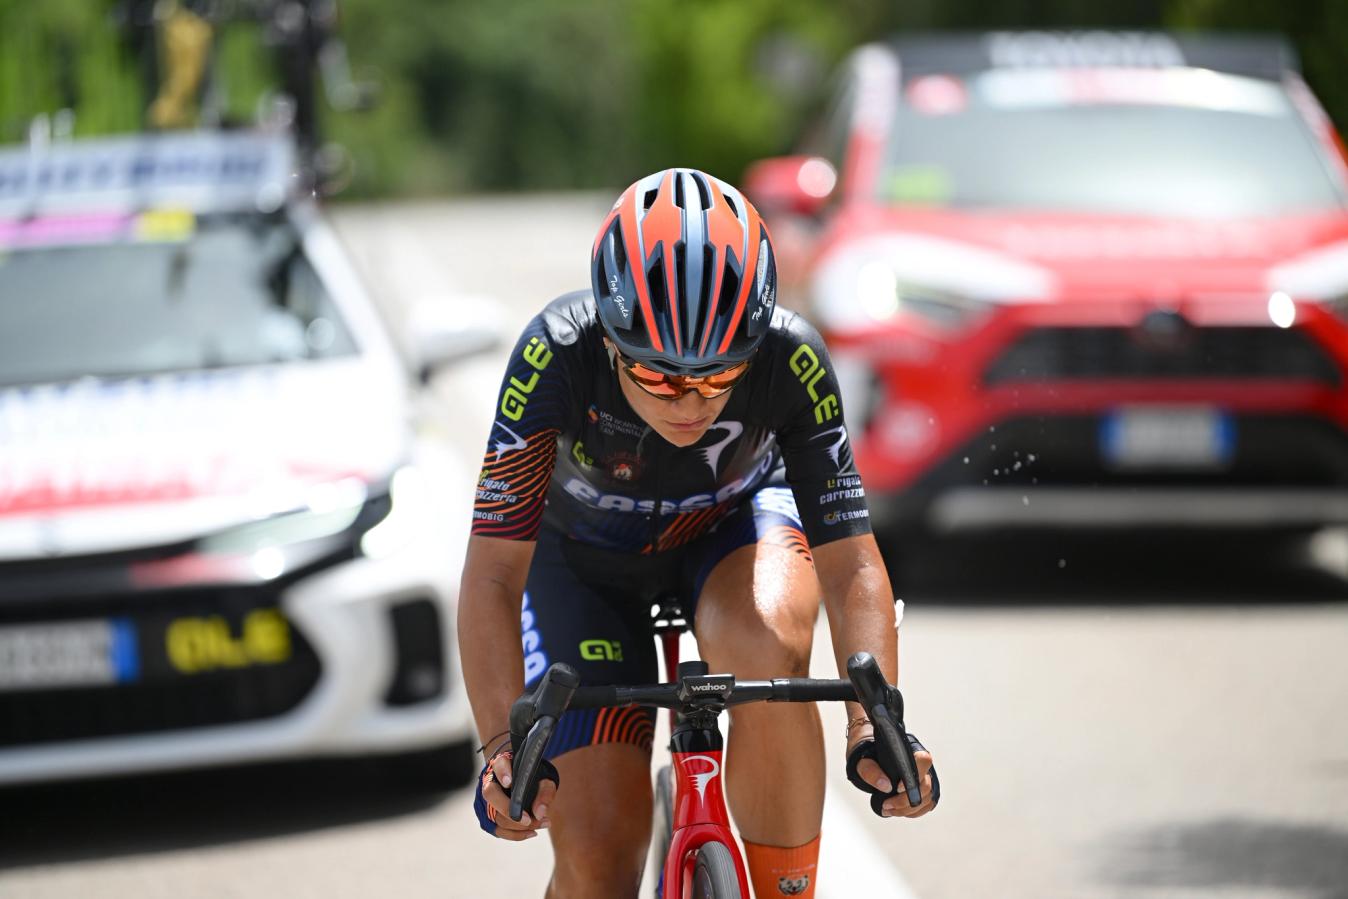 Alessia Vigilia has performed well for Team Top Girls Fassa Bortolo and will now get her WorldTour shot with FDJ-SUEZ